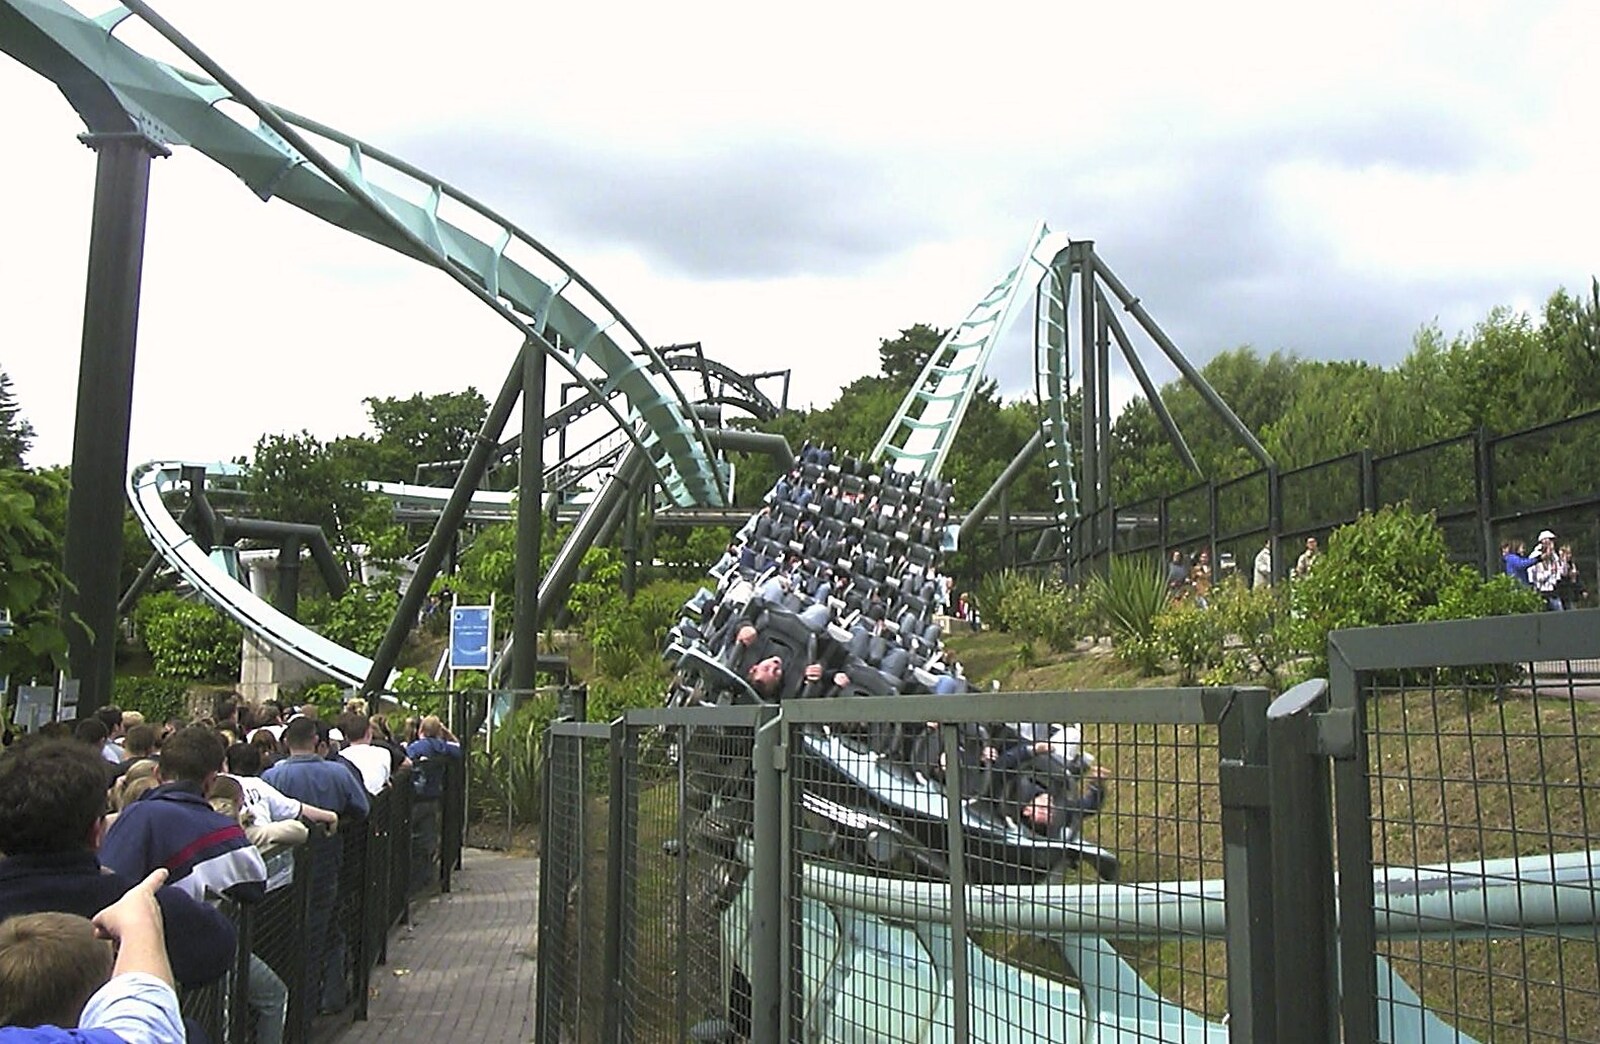 A Trip to Alton Towers, Staffordshire - 19th June 2004: The Air rollercoaster comes around